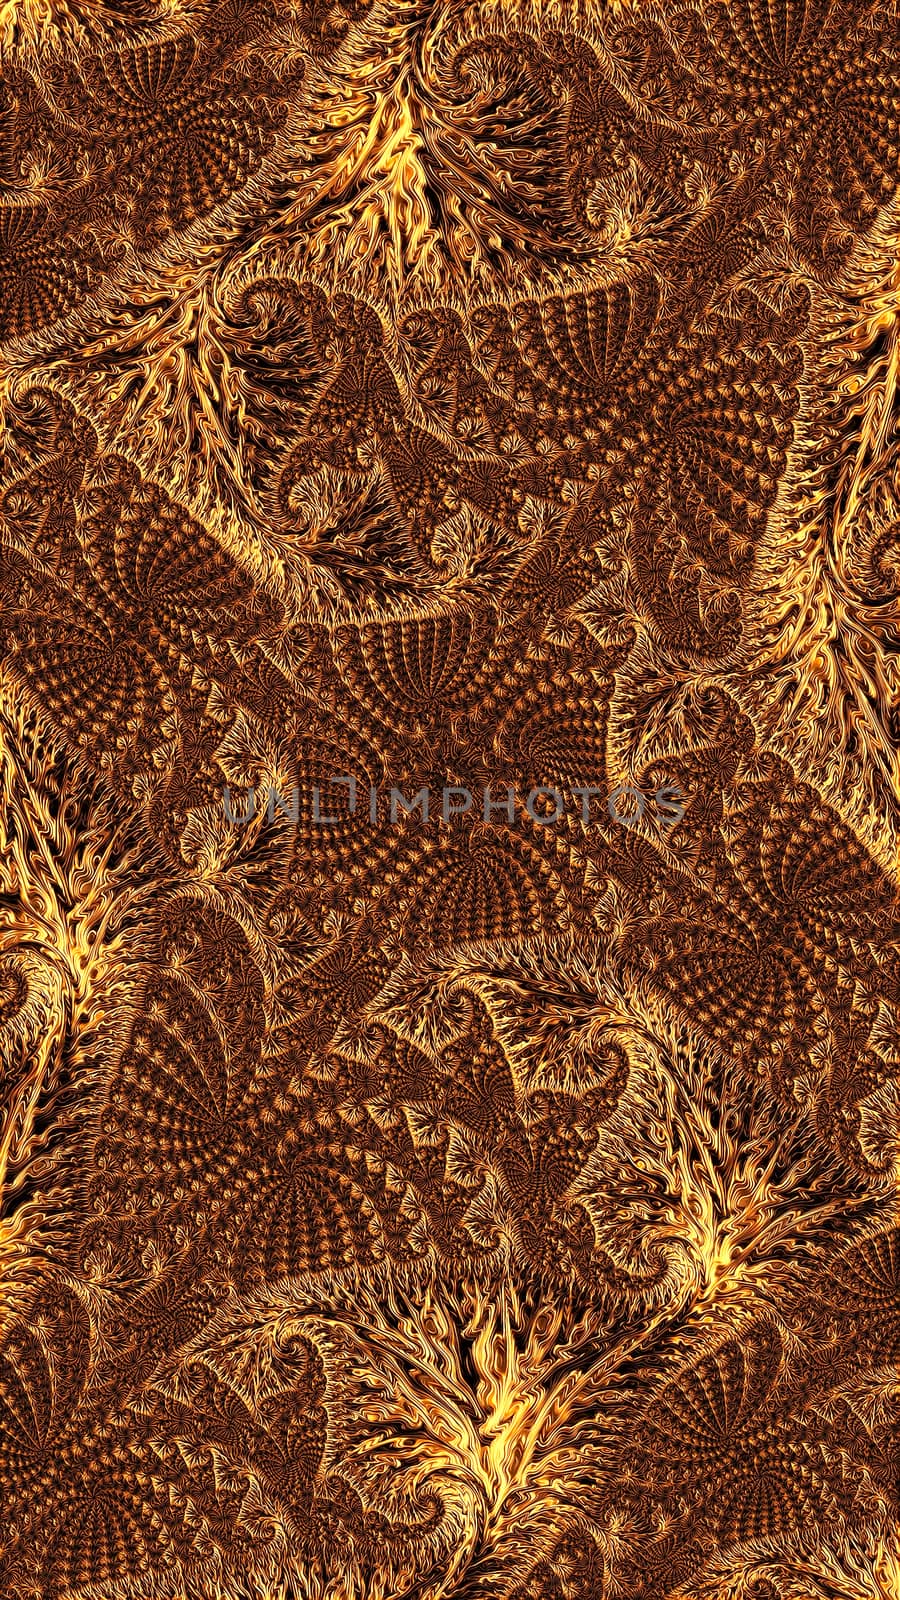 Abstract intricate texture - computer-generated image. Fractal geometry: curls and curles woven into a complex ornament. Asymmetric pattern for covers, puzzles, web design.